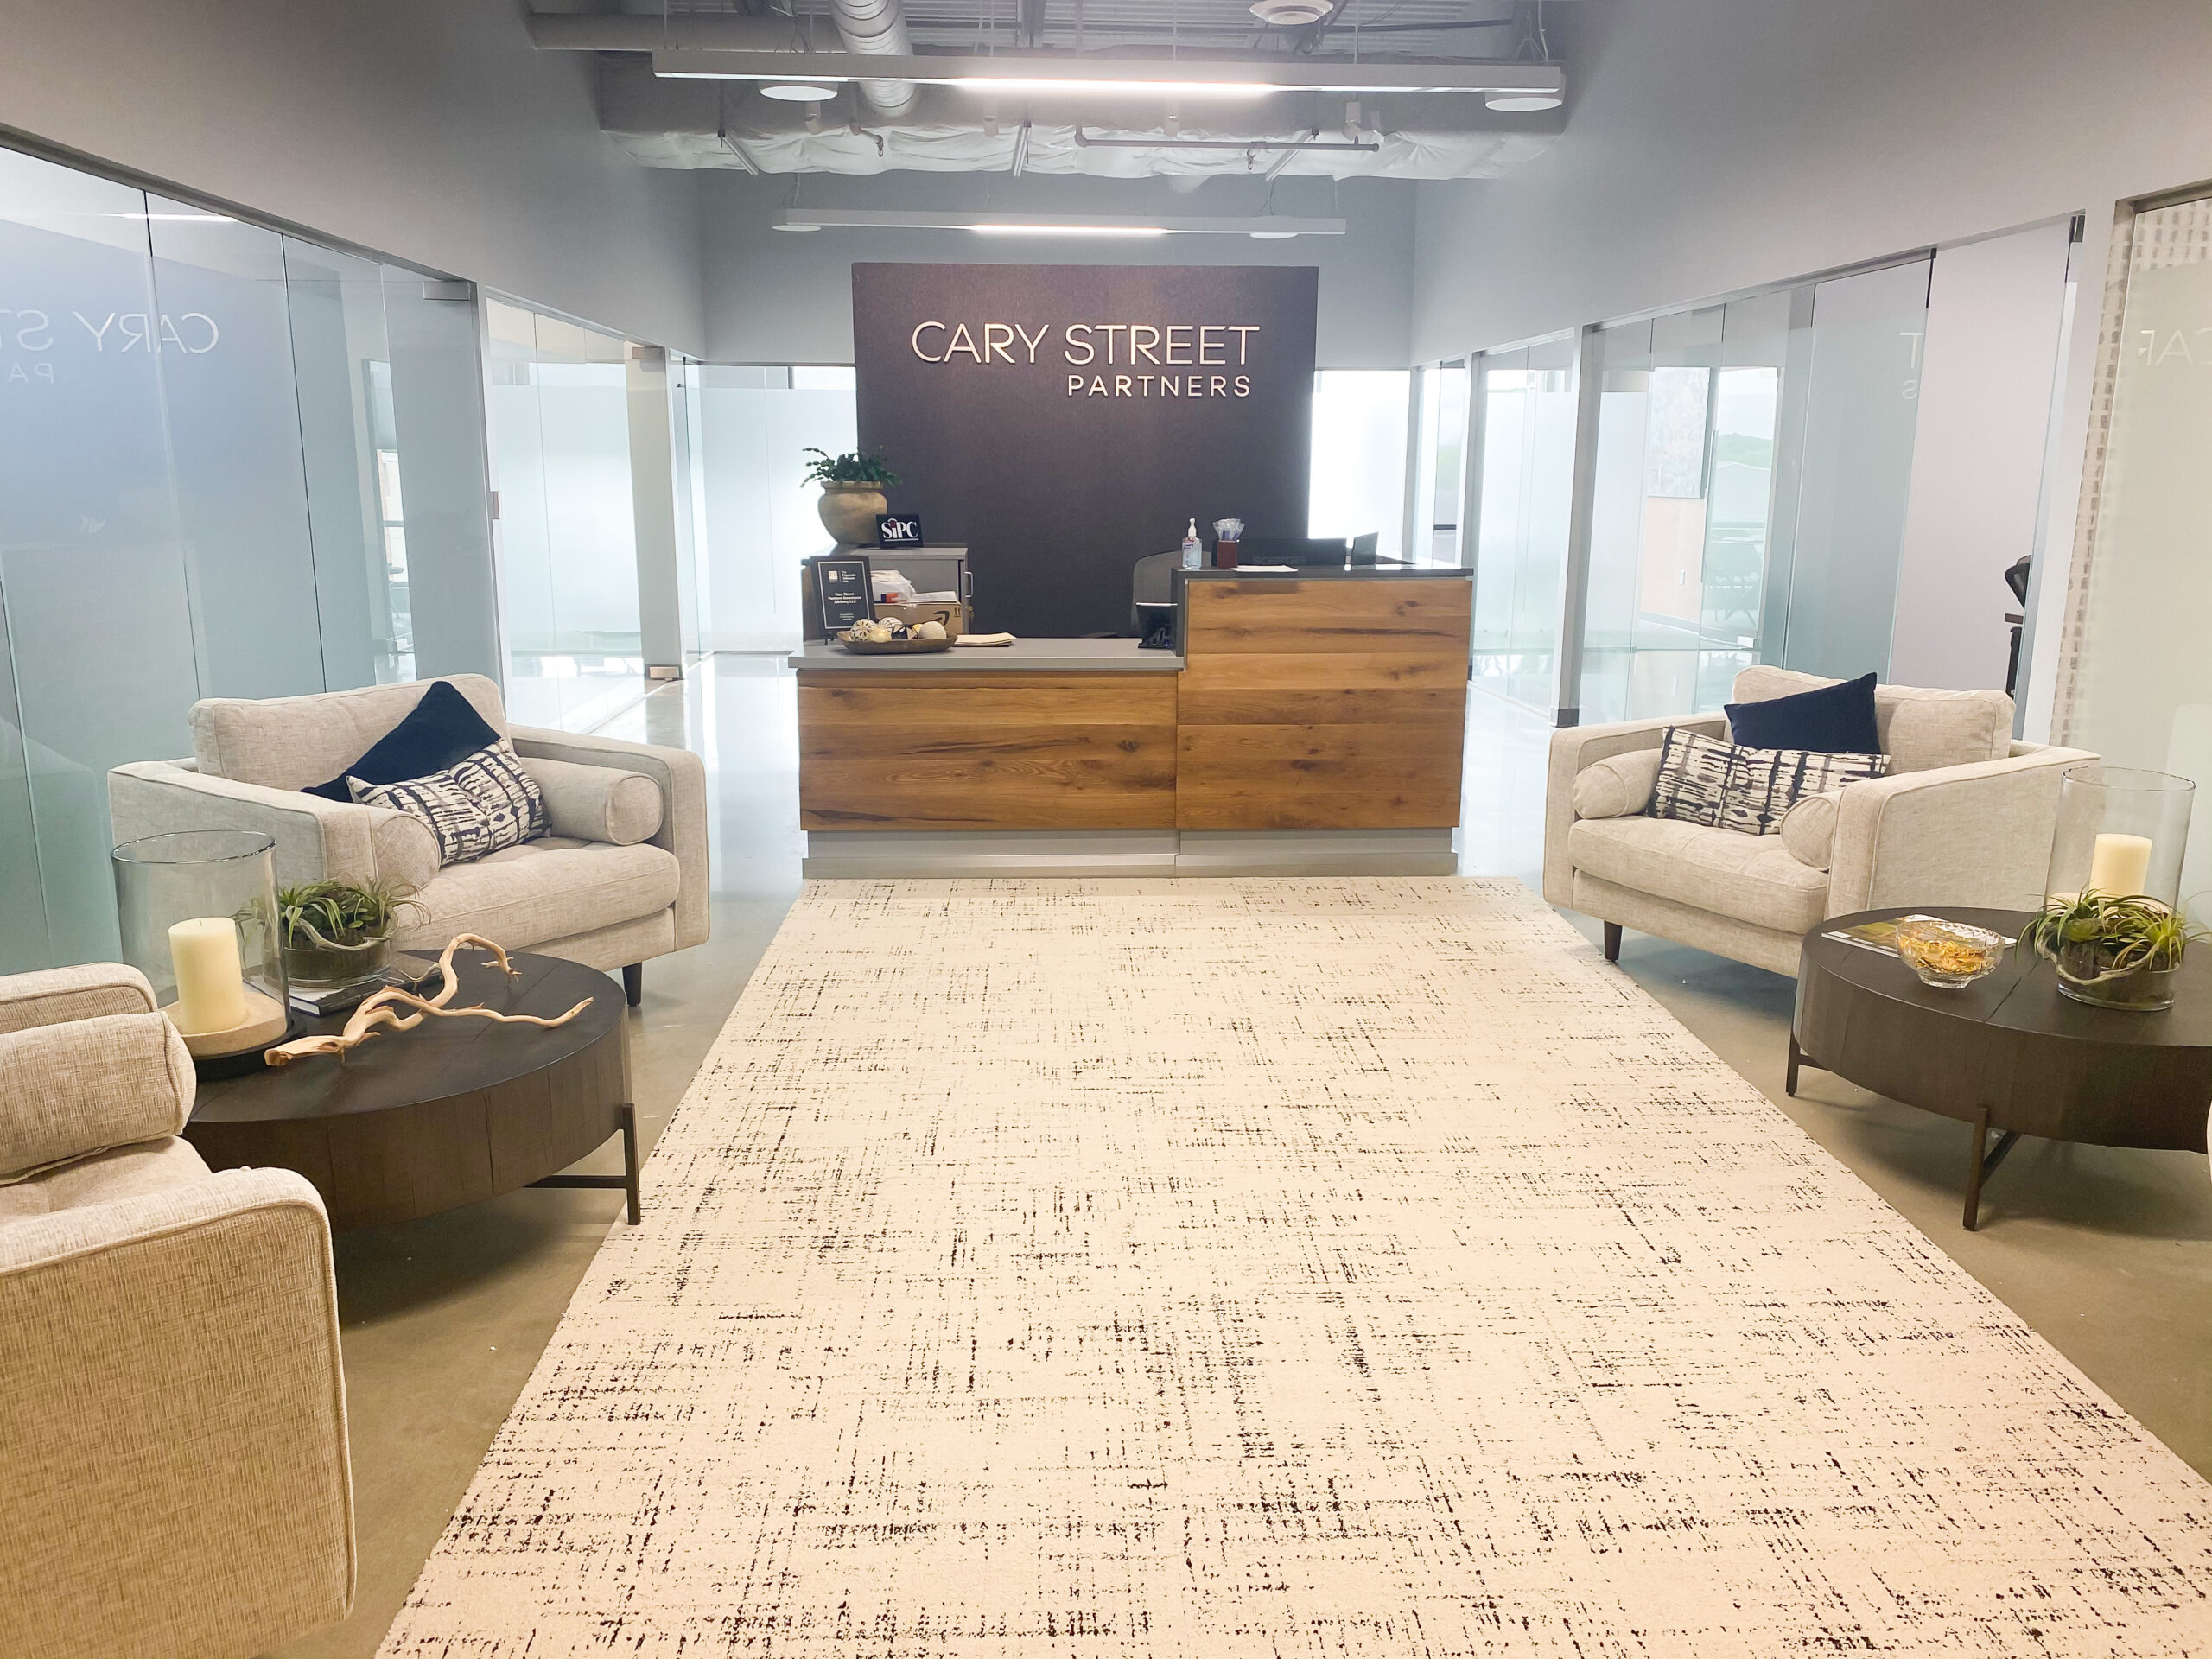 Cary Street Partners gets new home, recognition